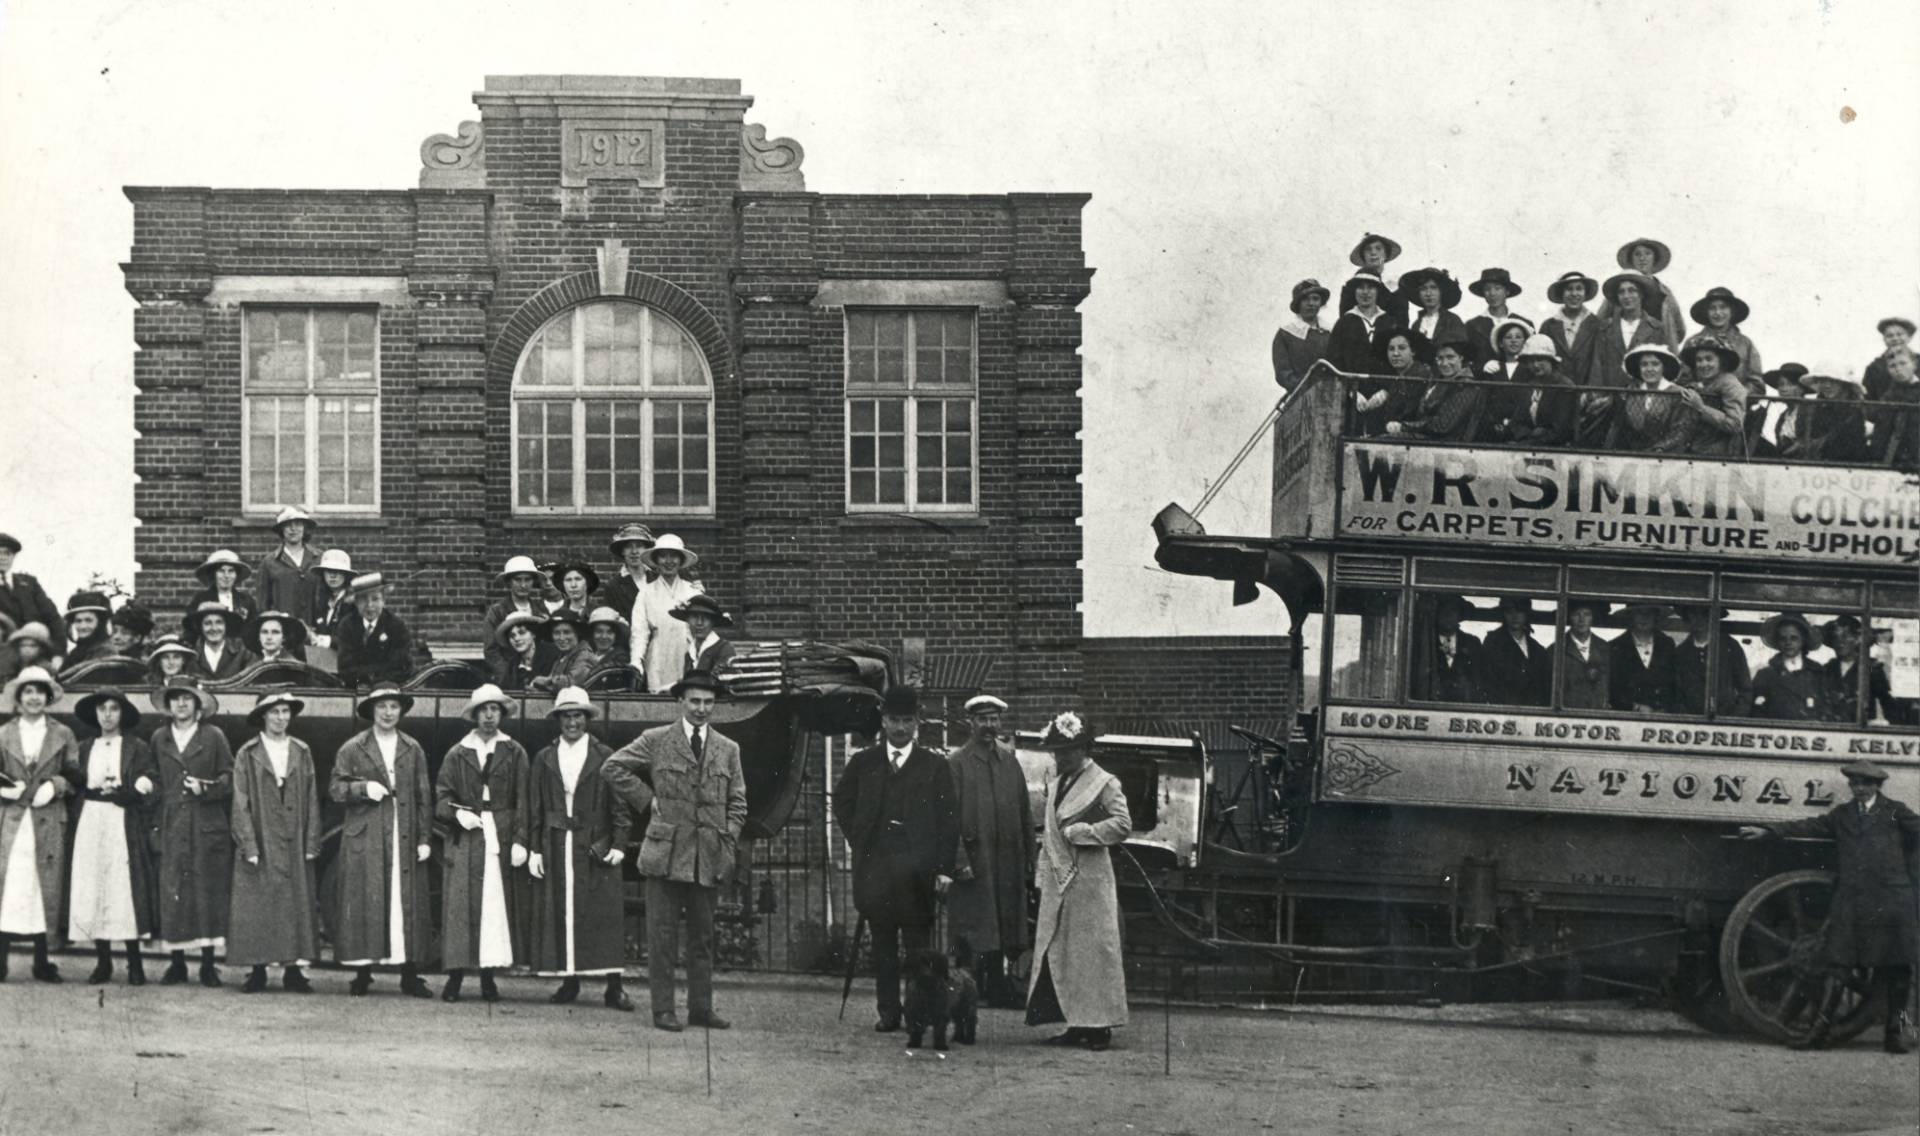 Witham factory outing to Clacton in 1916